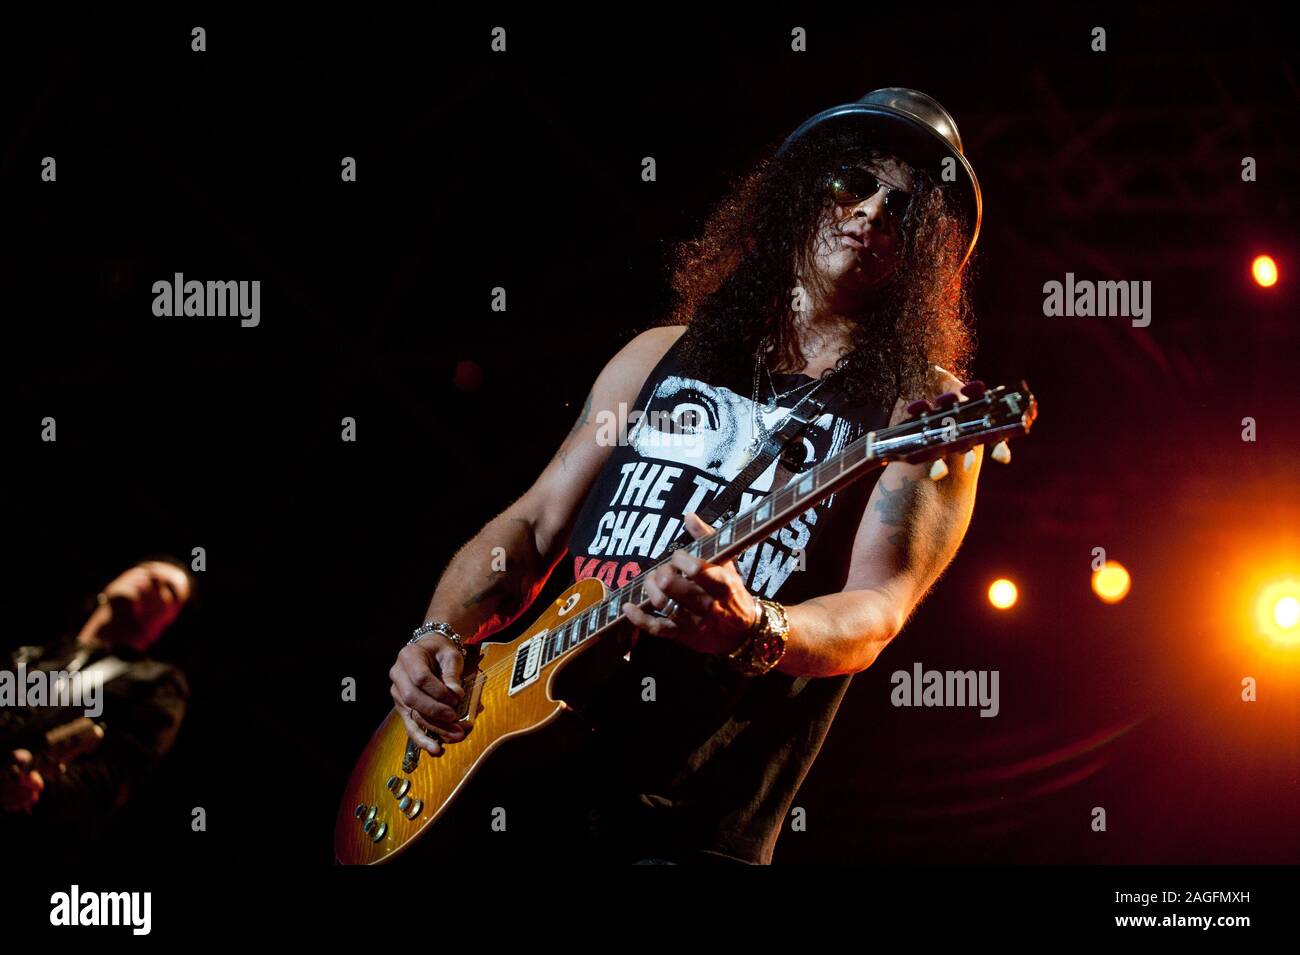 Milan  Italy  28 July 2011,Live concert of Slash at the Arena Civica : Slash during the concert Stock Photo